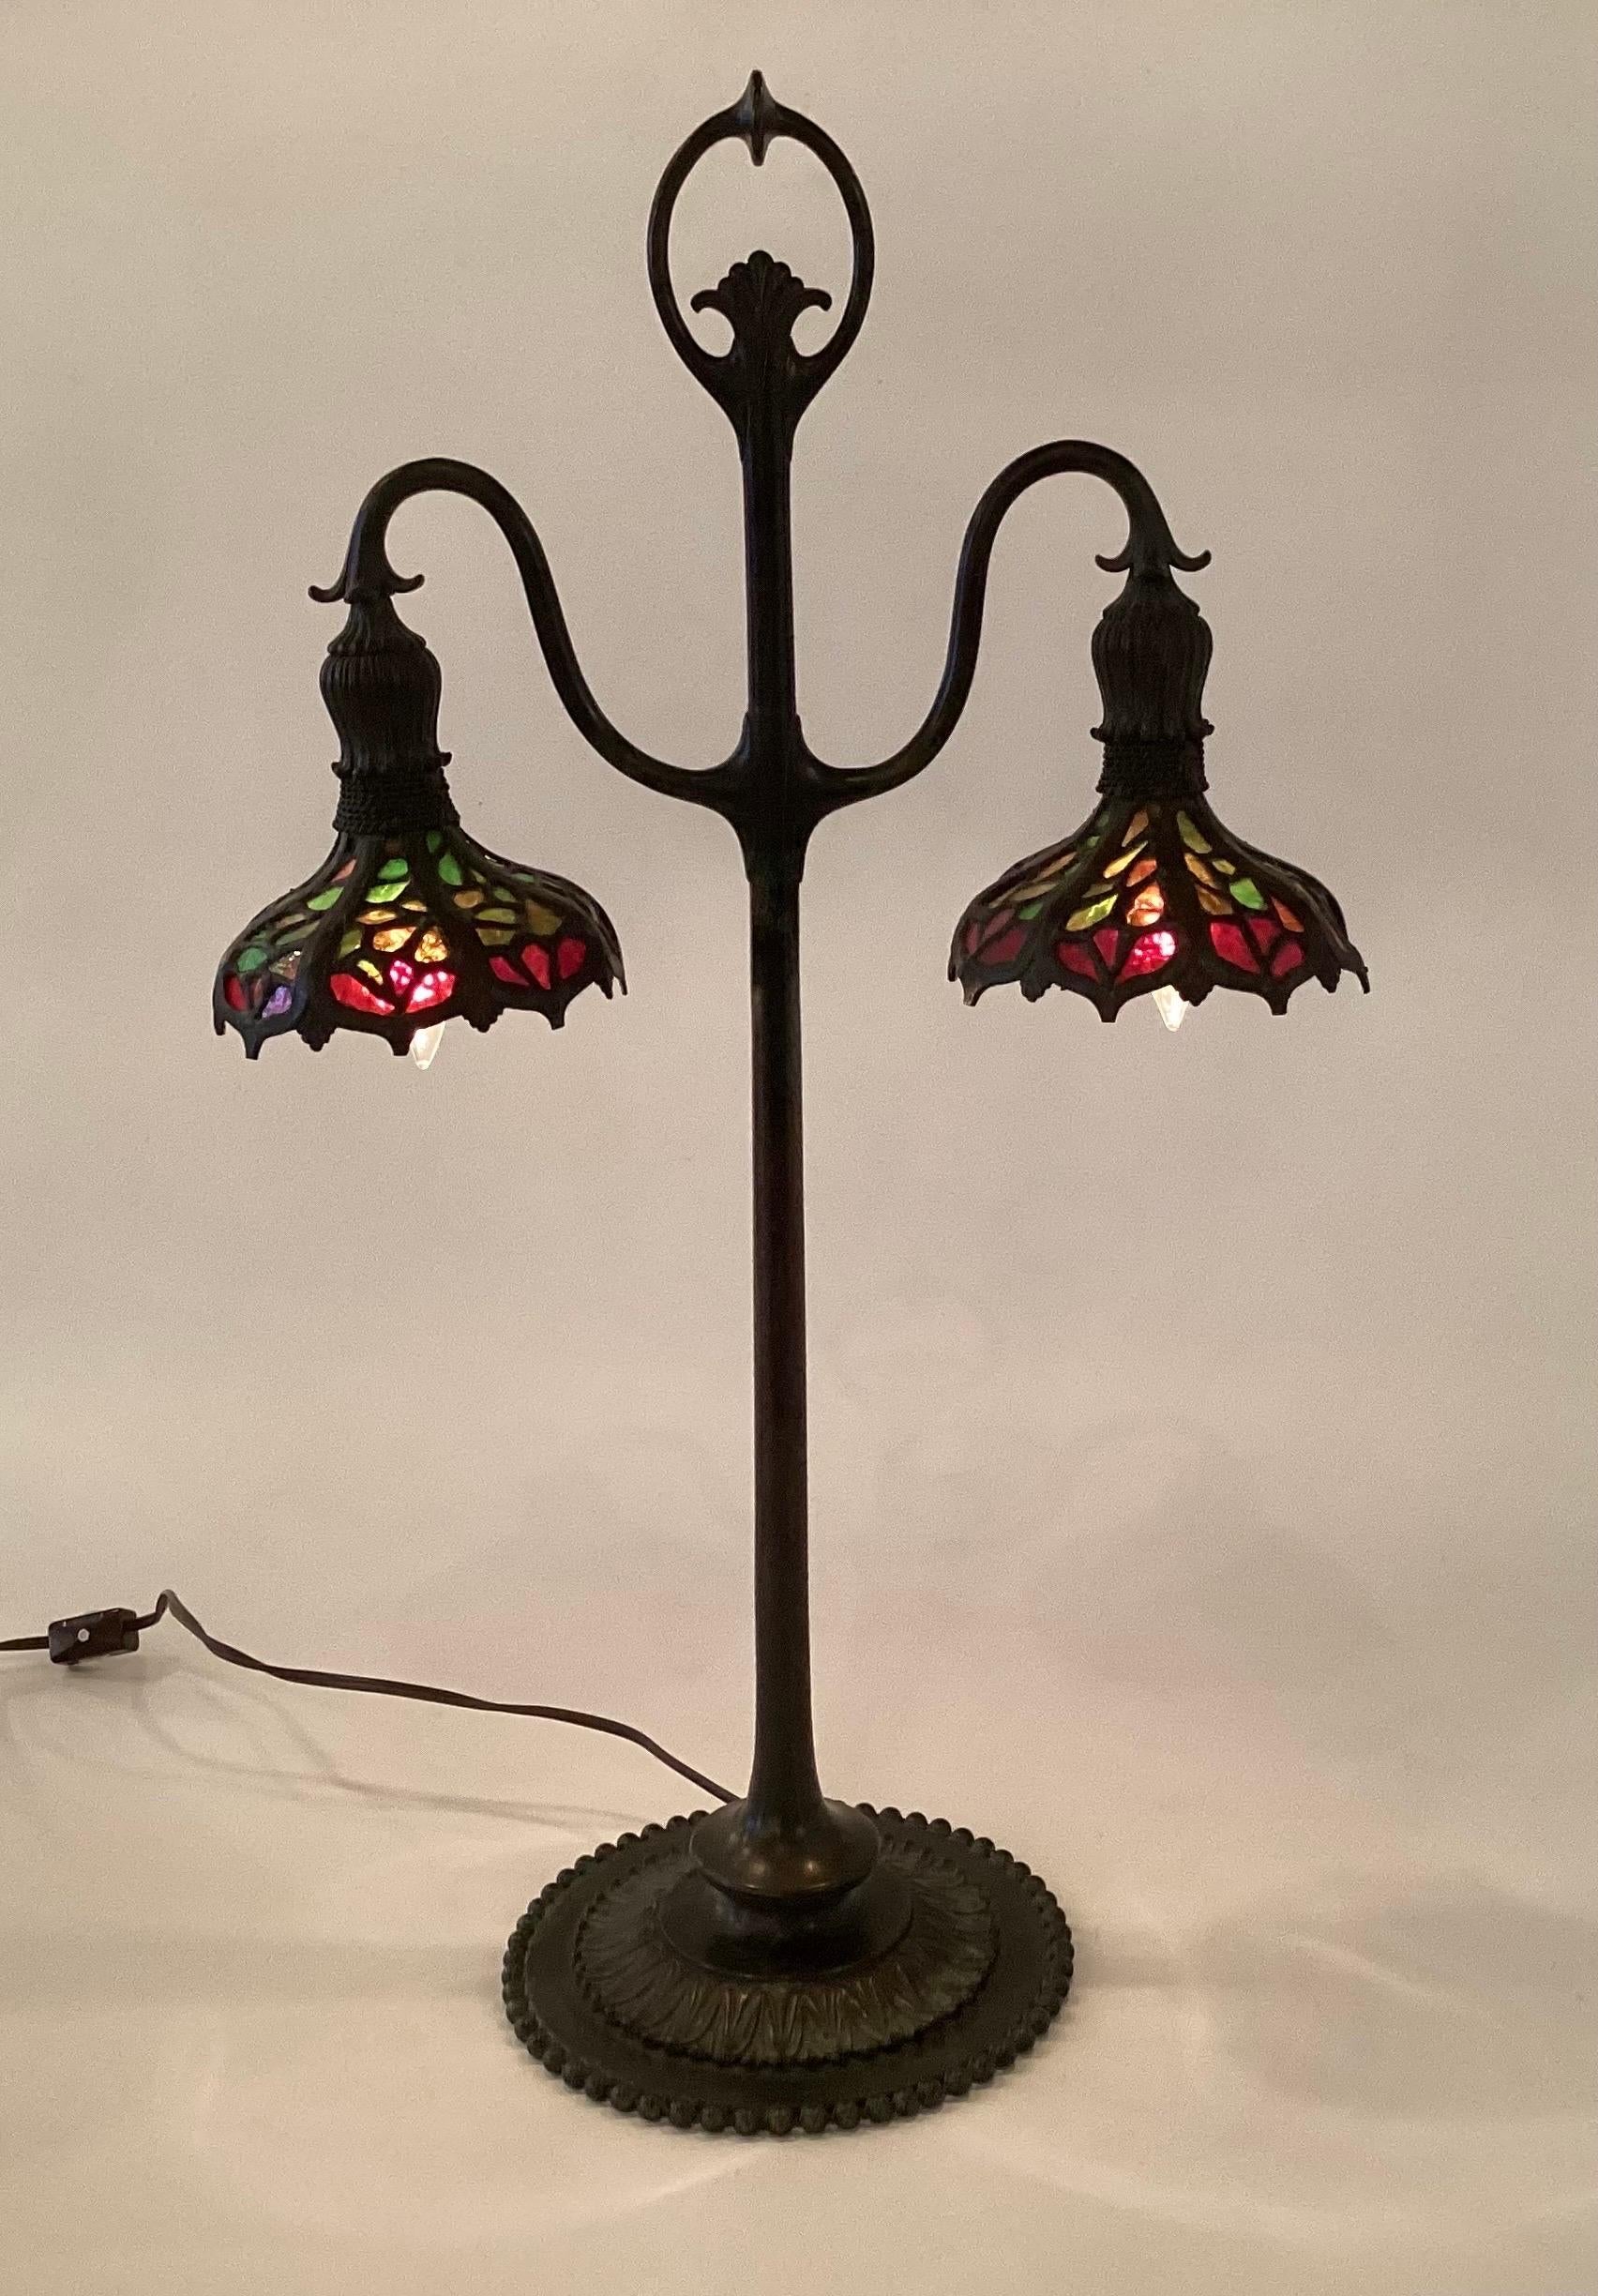 A Rare high quality double student lamp attributed to Bigelow, Kennard by Enos Lamp in NYC, very good condition with original shades and patination to the bronze The piece has a questionable mark on the base of Tiffany Studios which was a common